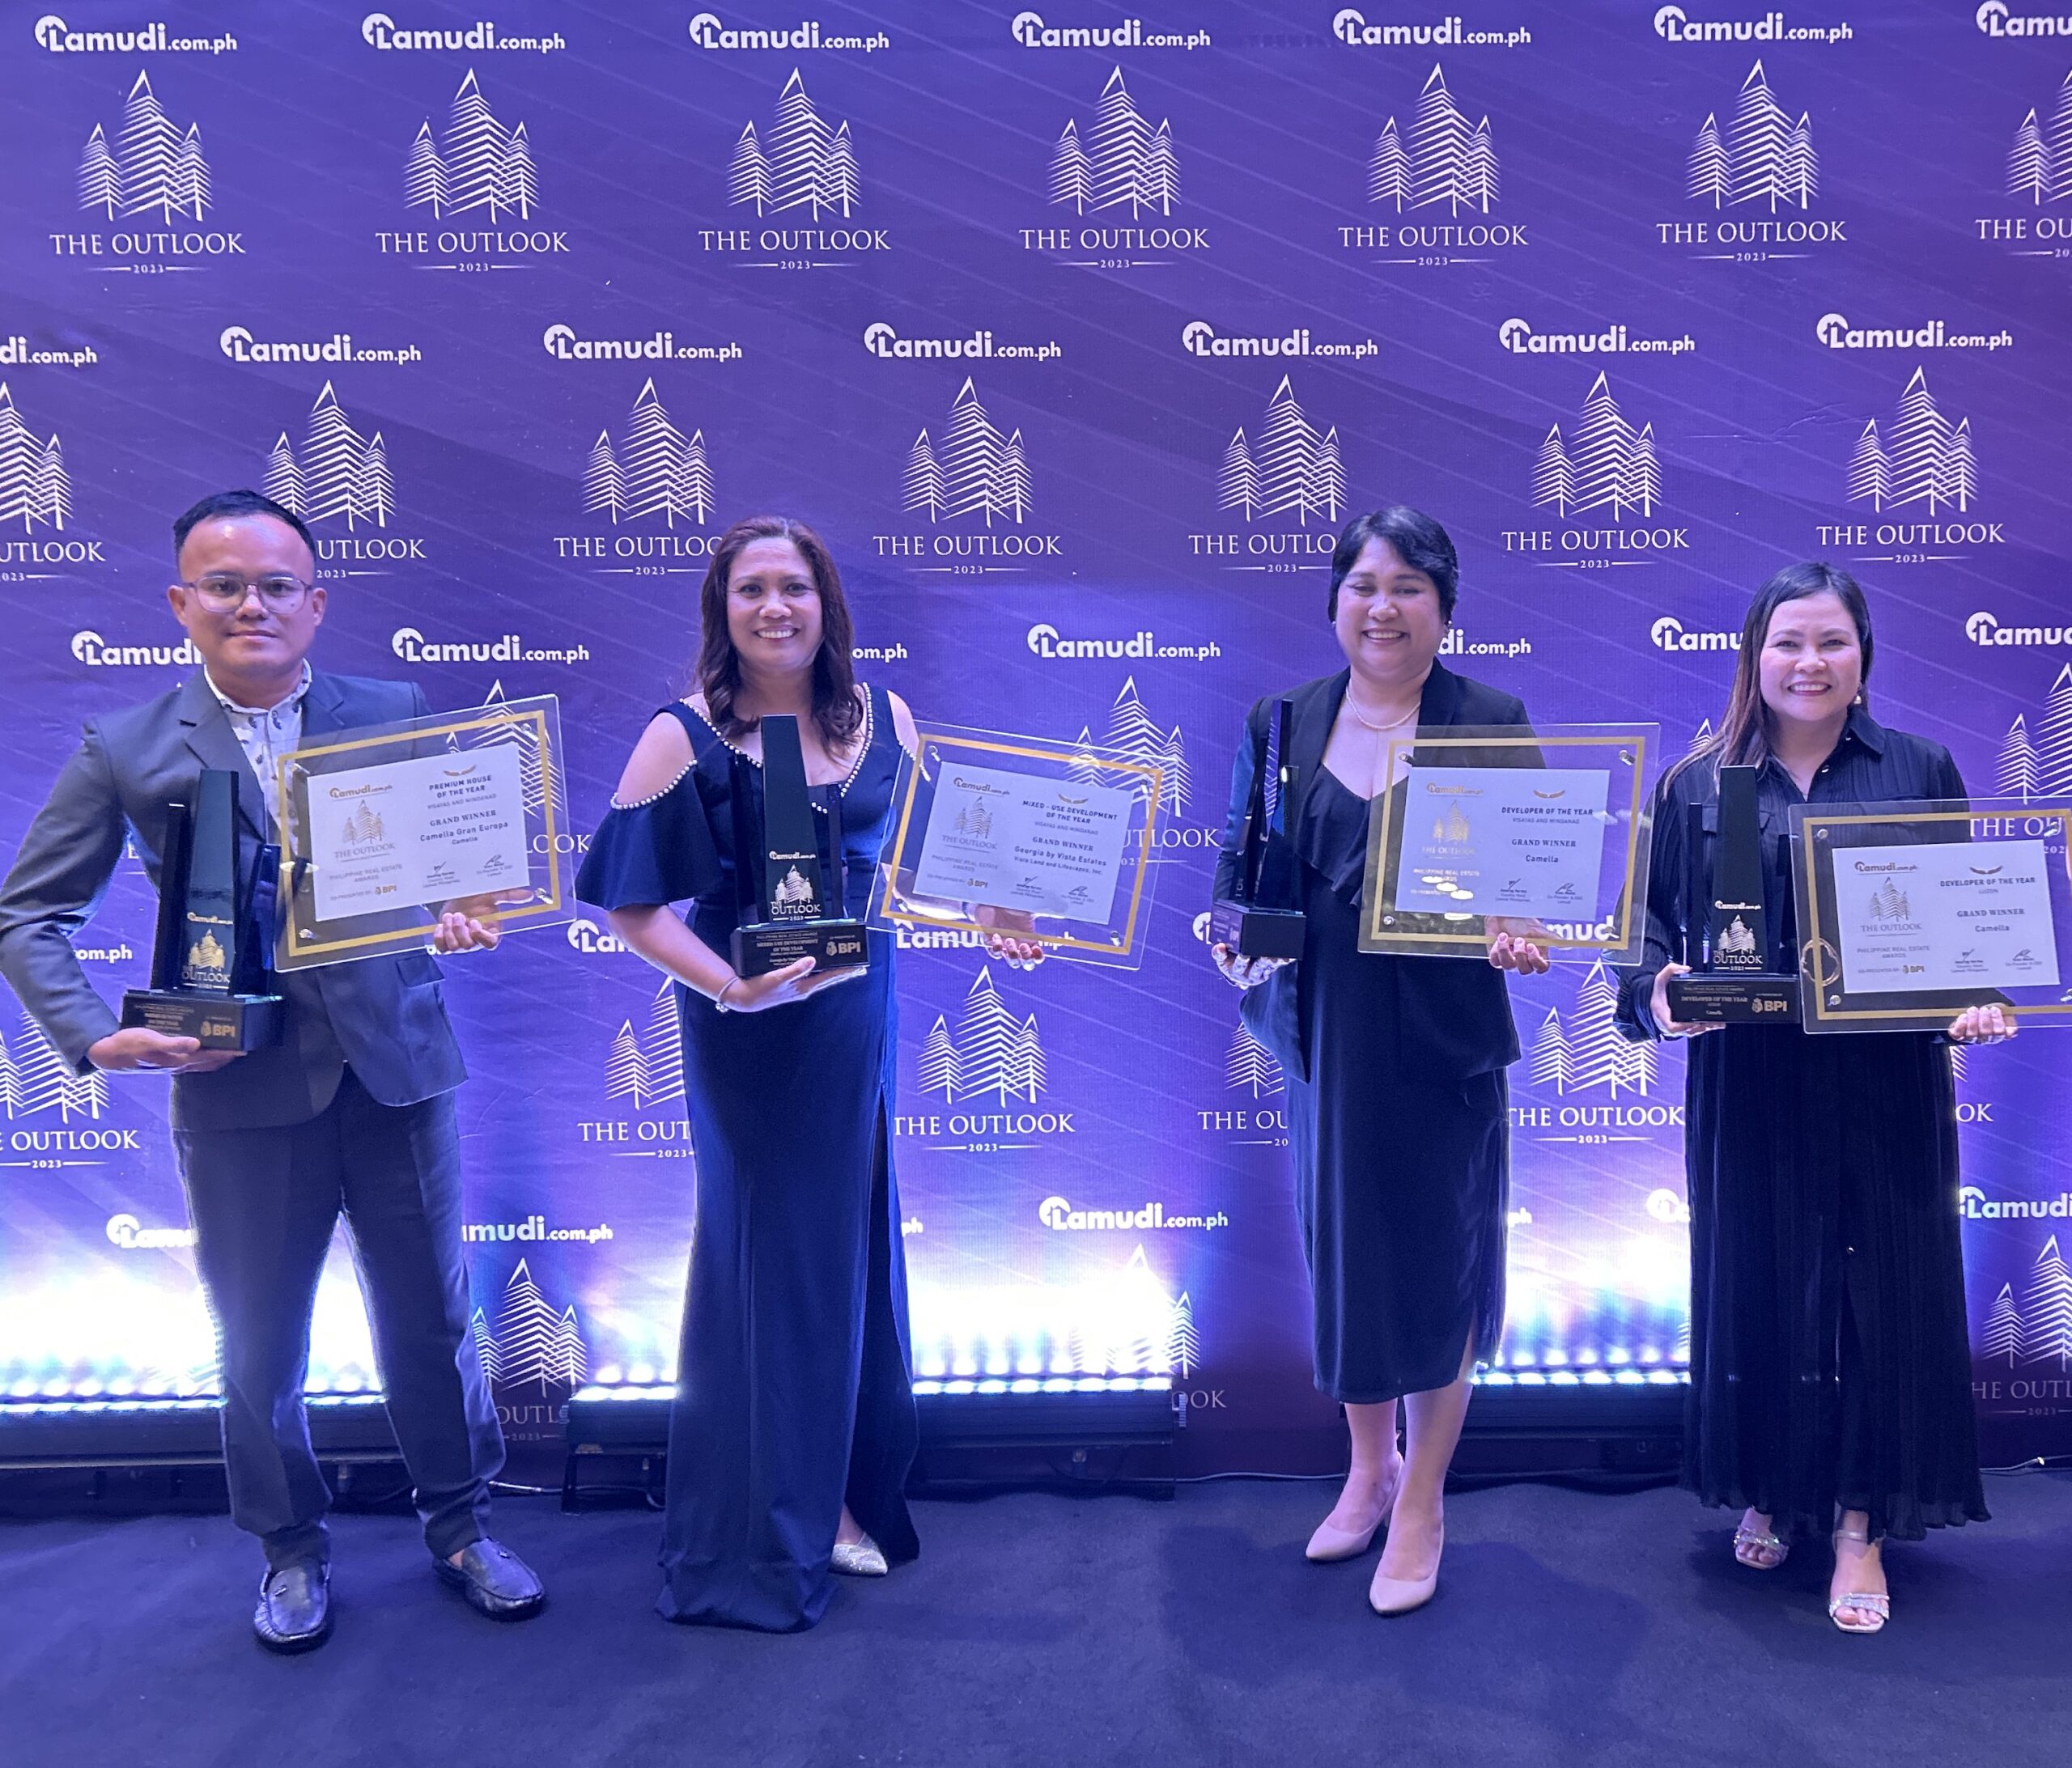  Proudly receiving the awards for Camella are Division Heads Rey Montoya, Lily Donasco, Tanette Pardito, and Rochelle Alpasan. 